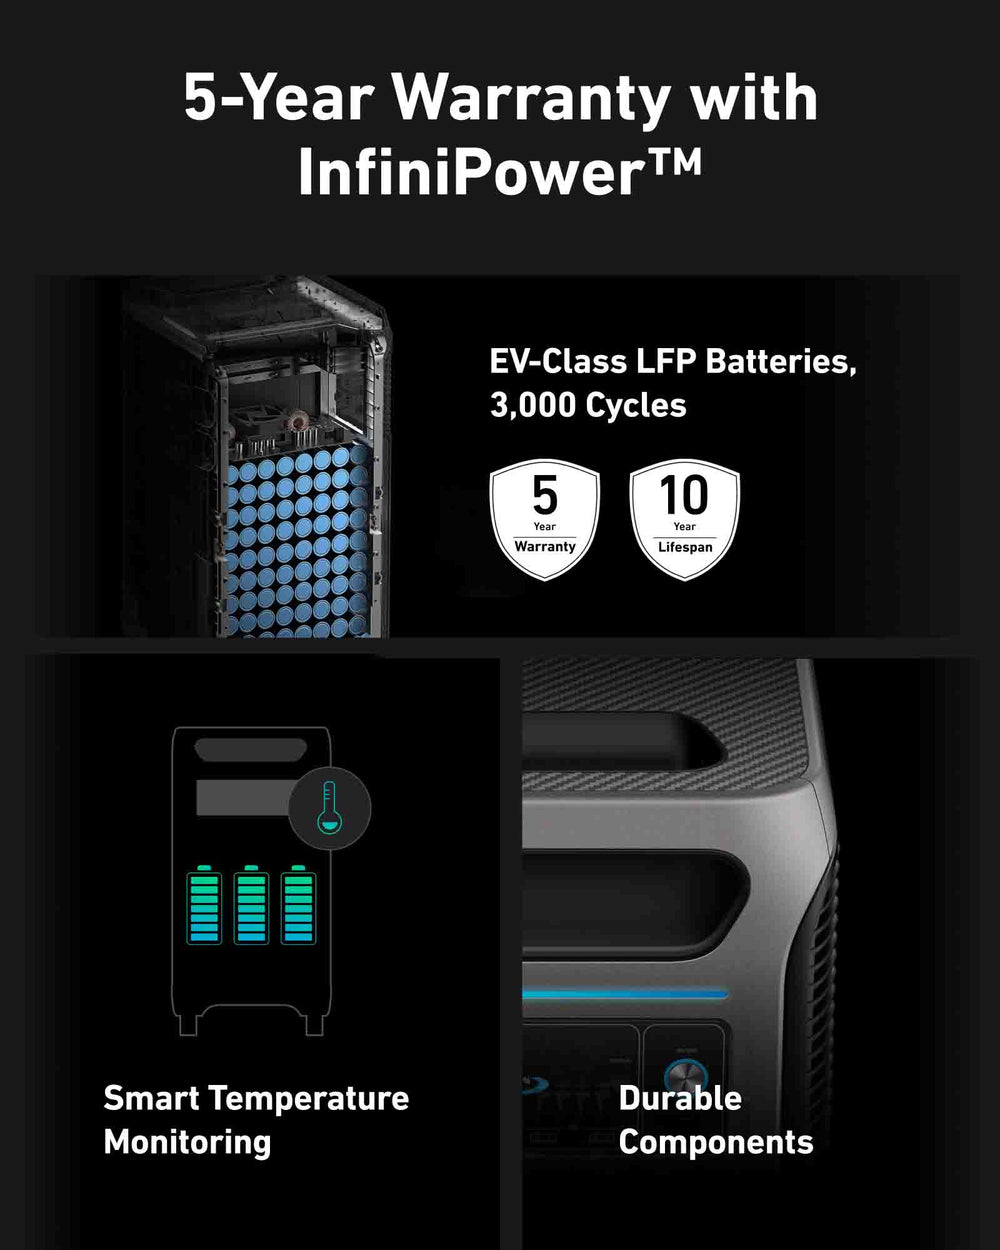 5-Year Warranty With InfiniPower